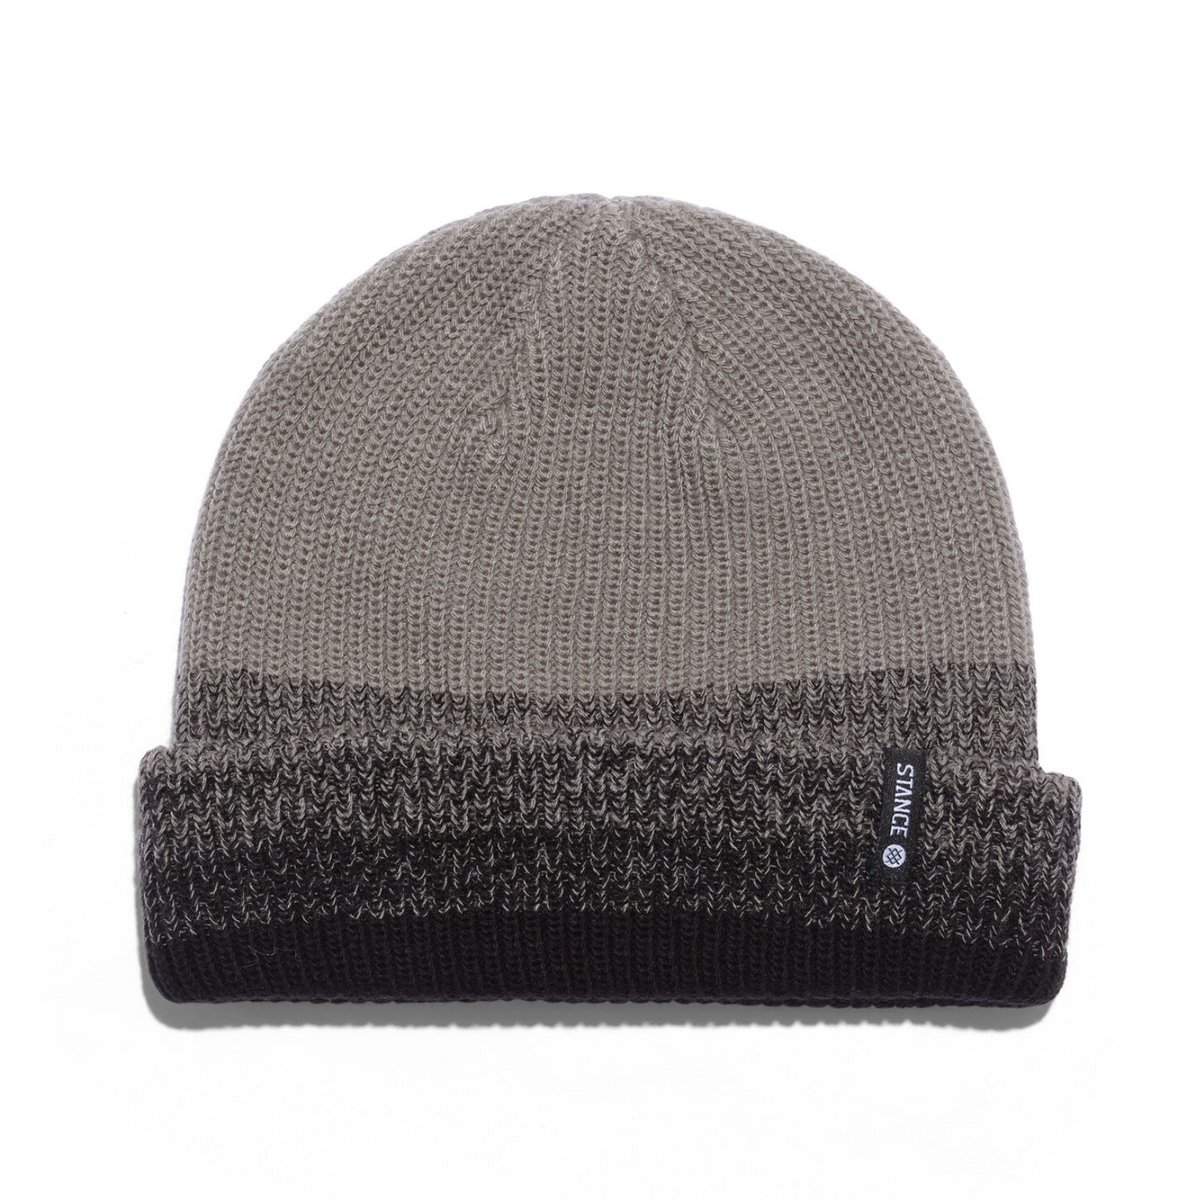 Stance Fade Beanie featuring gray and black pattern on display